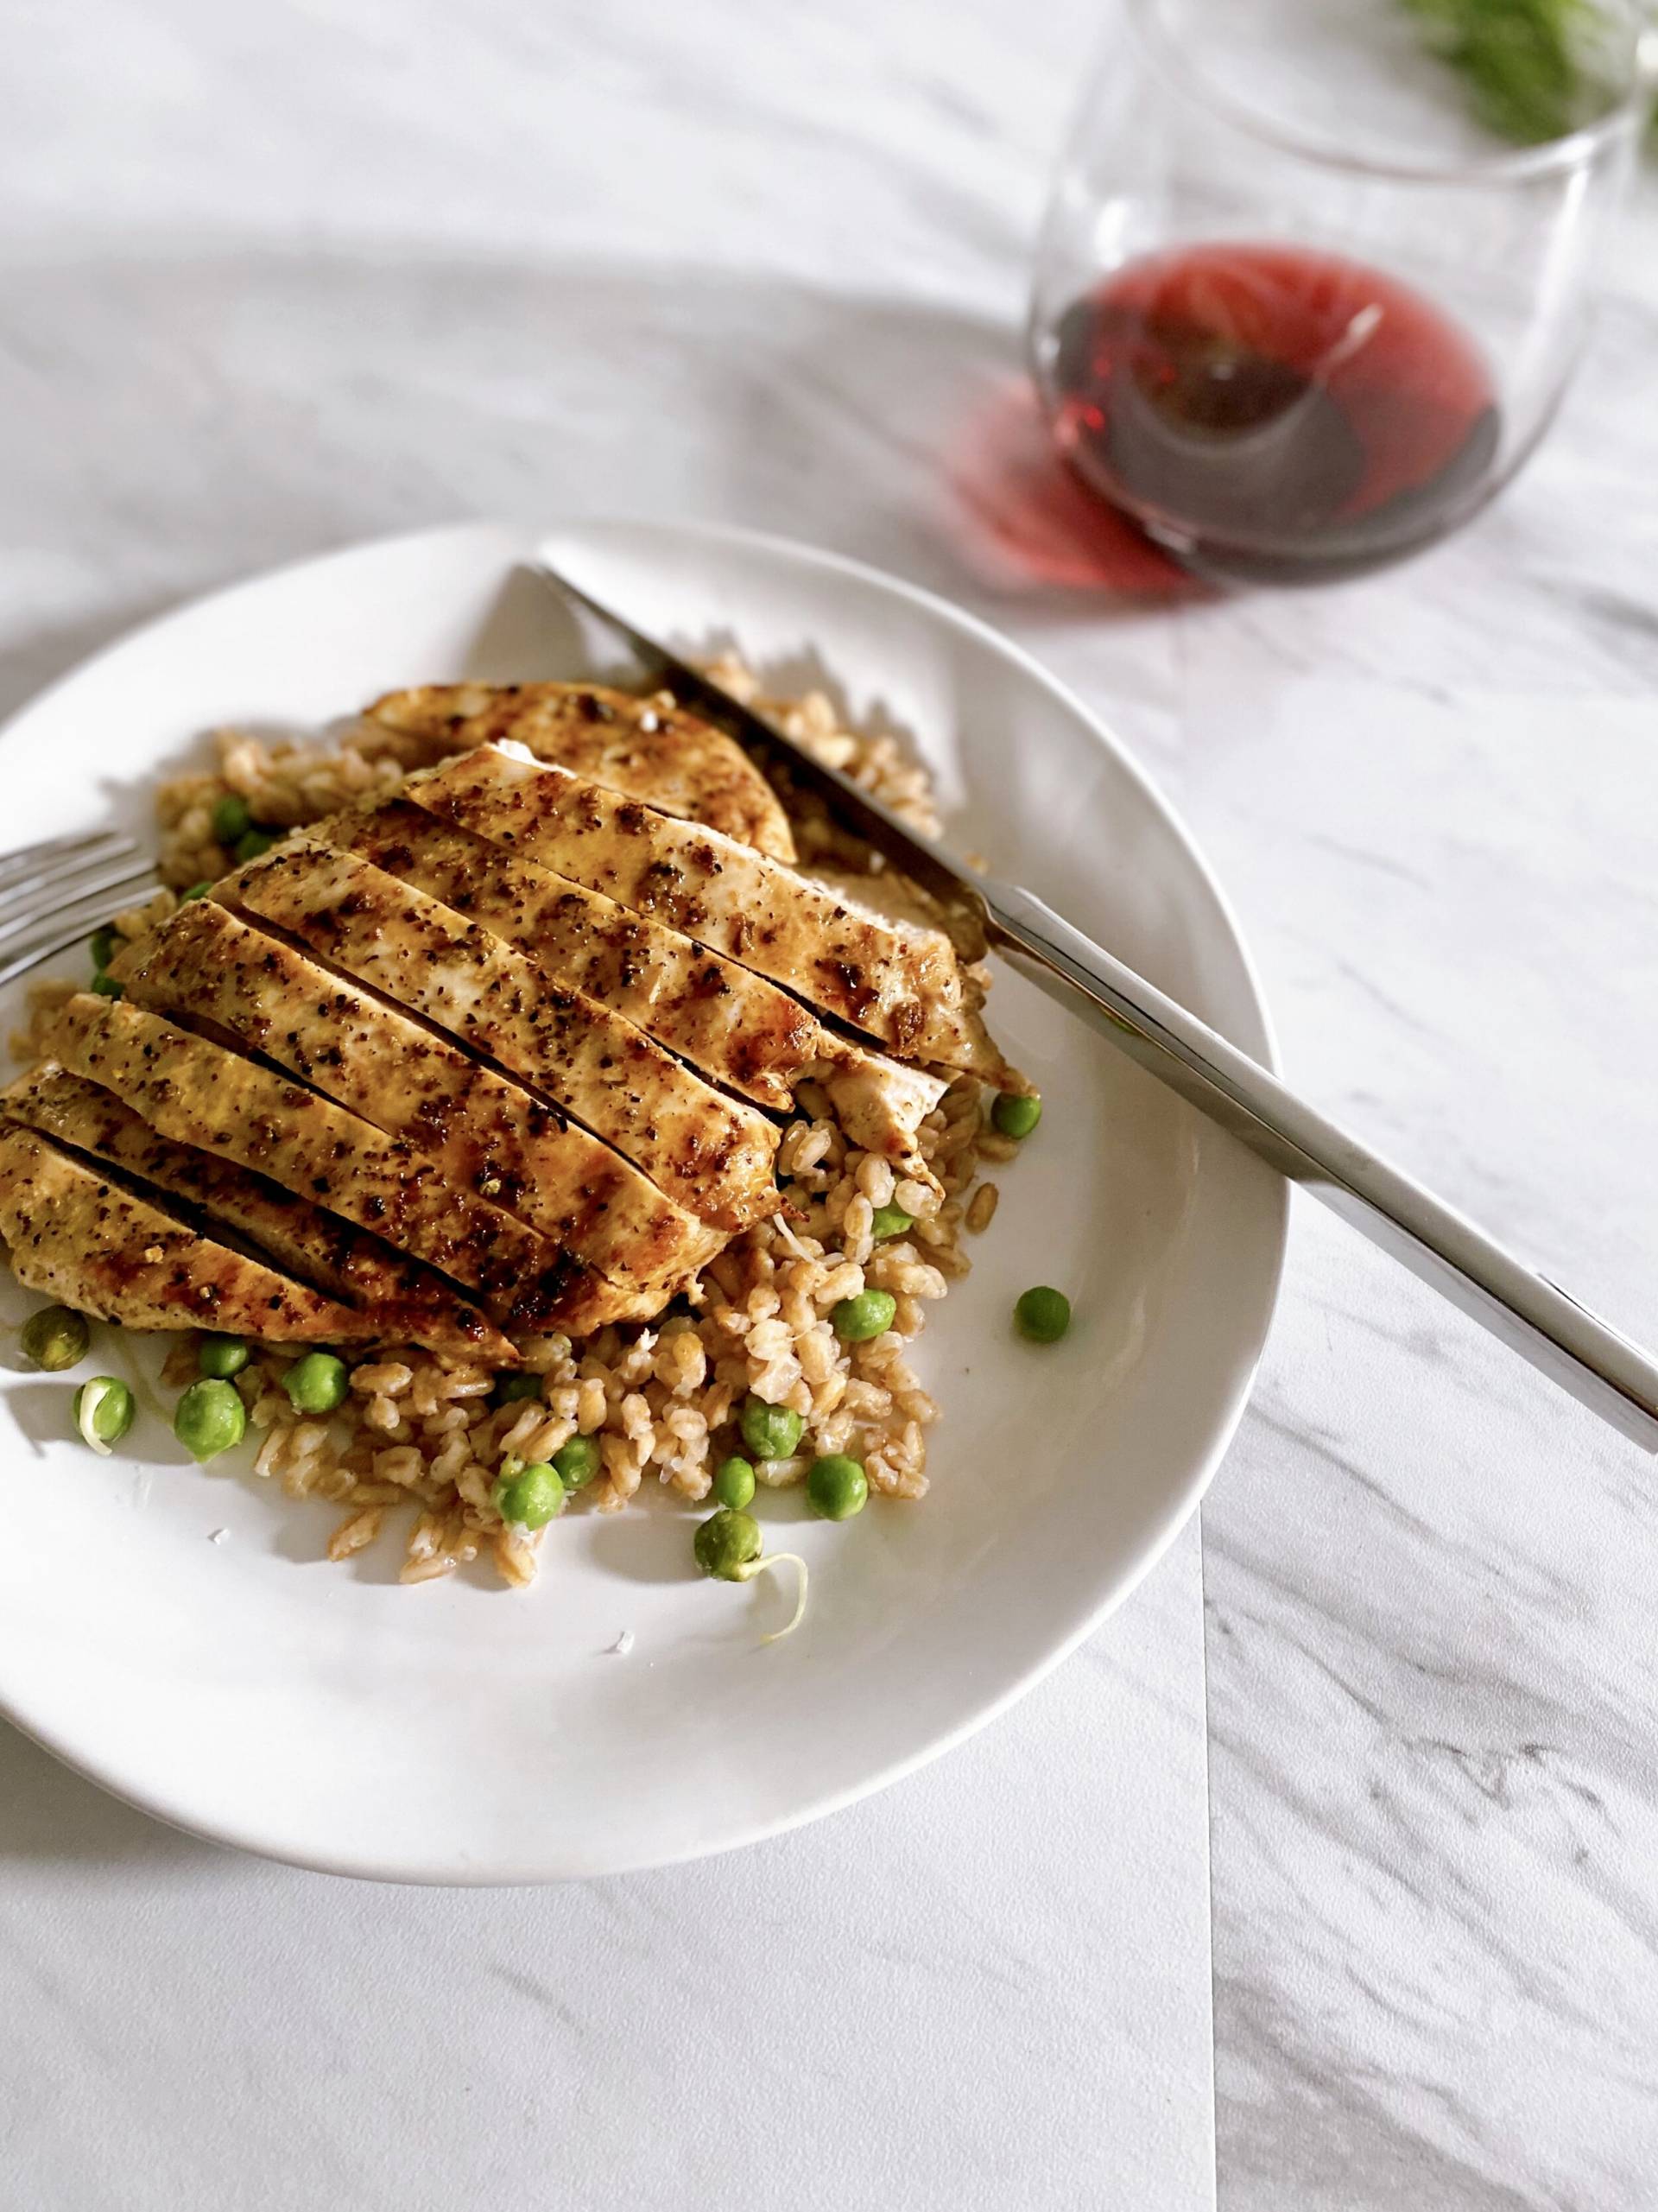 Grilled Chicken Over Farro Pilaf With Steamed Broccoli